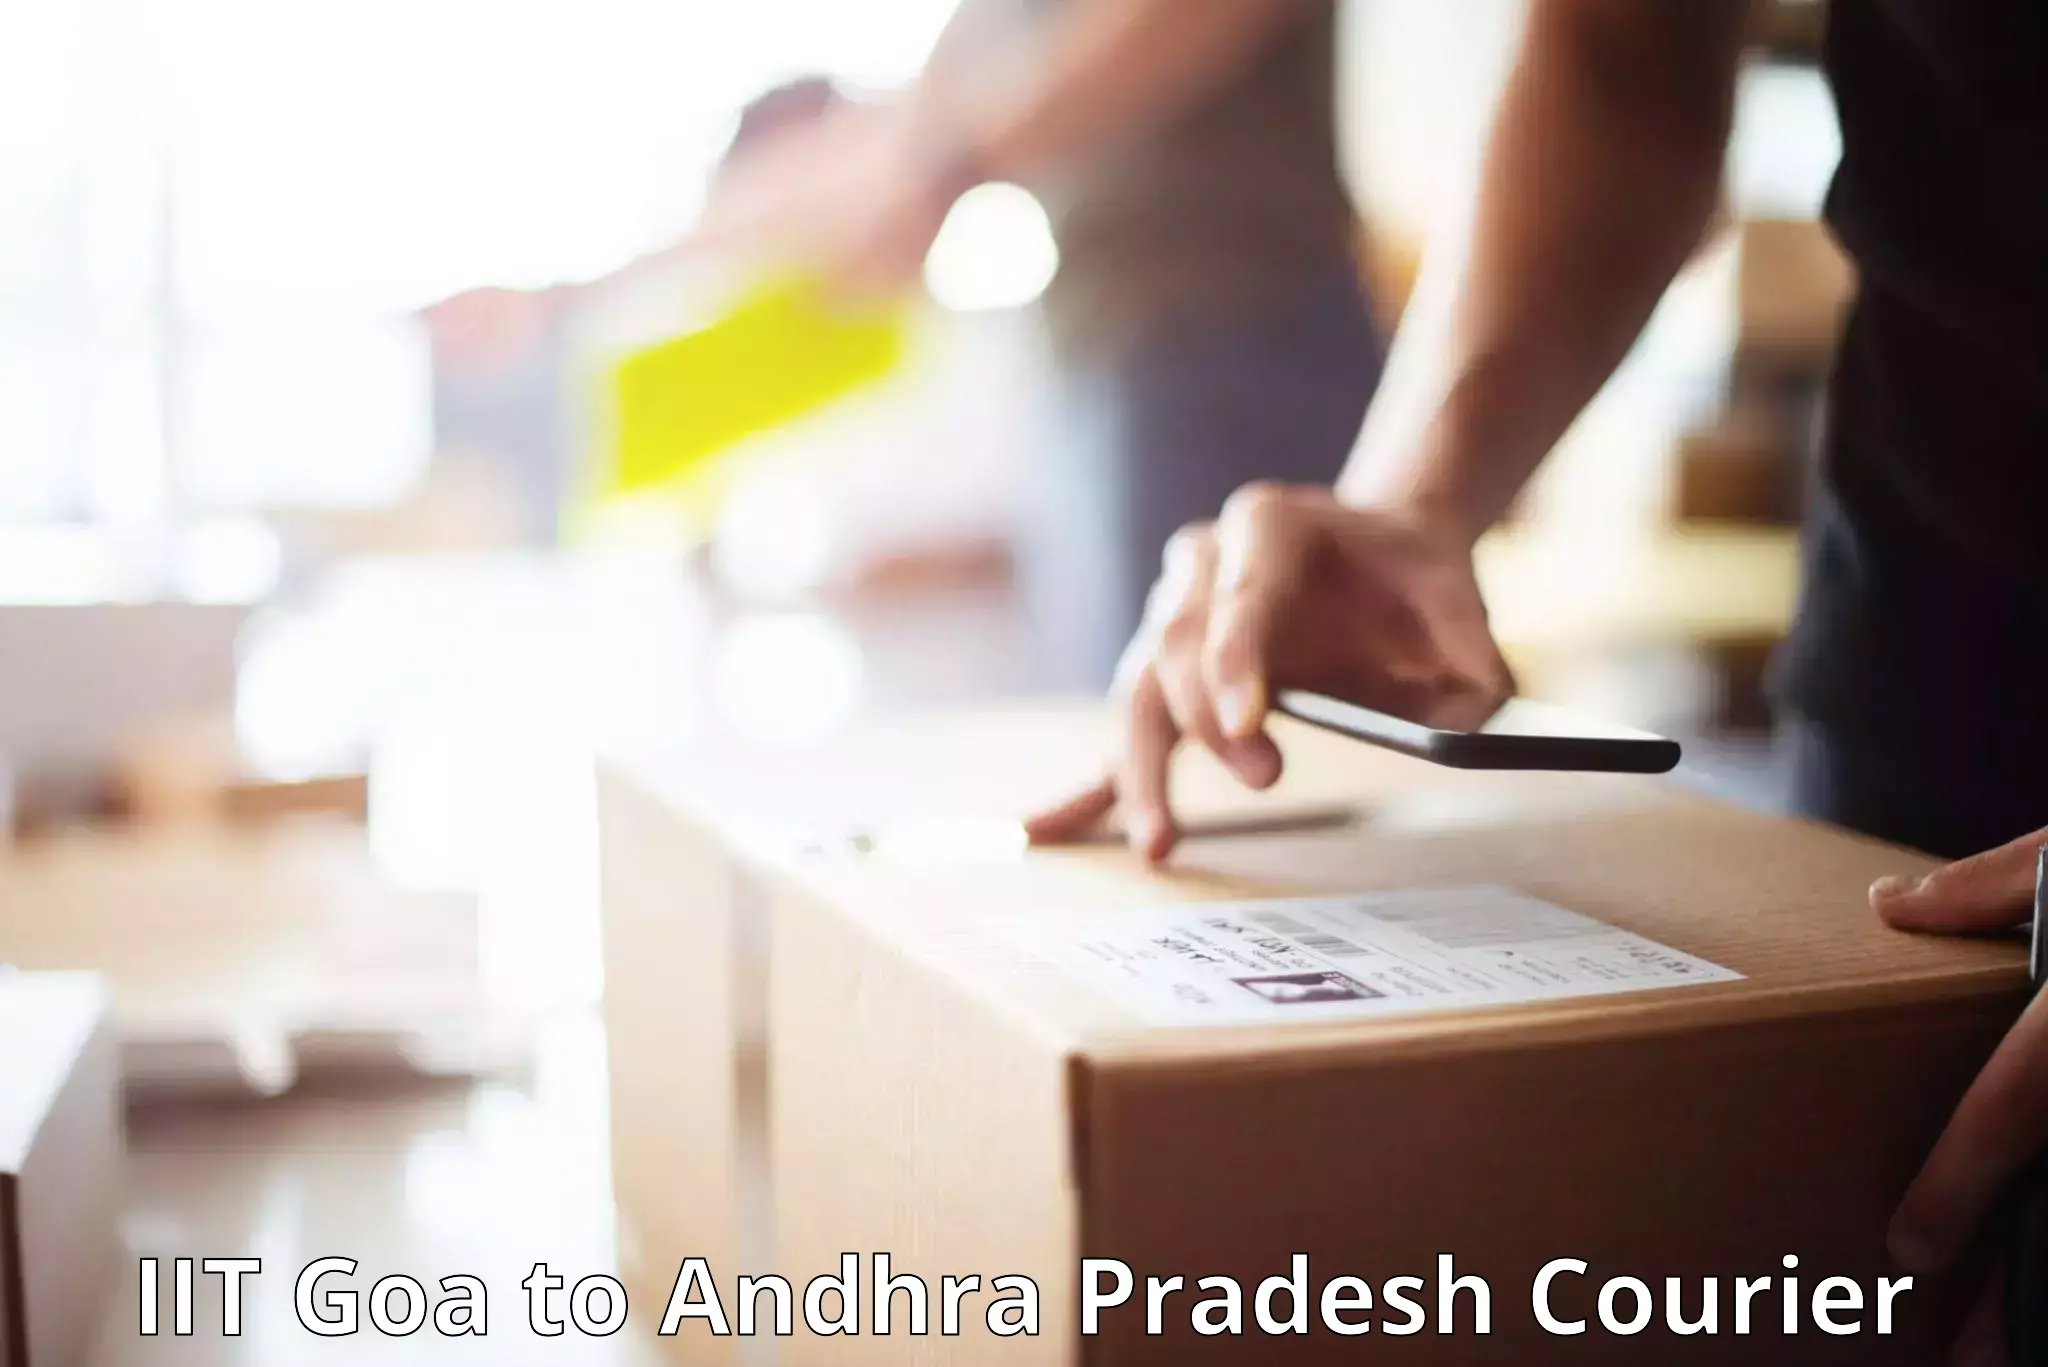 Personal effects shipping in IIT Goa to Pathapatnam